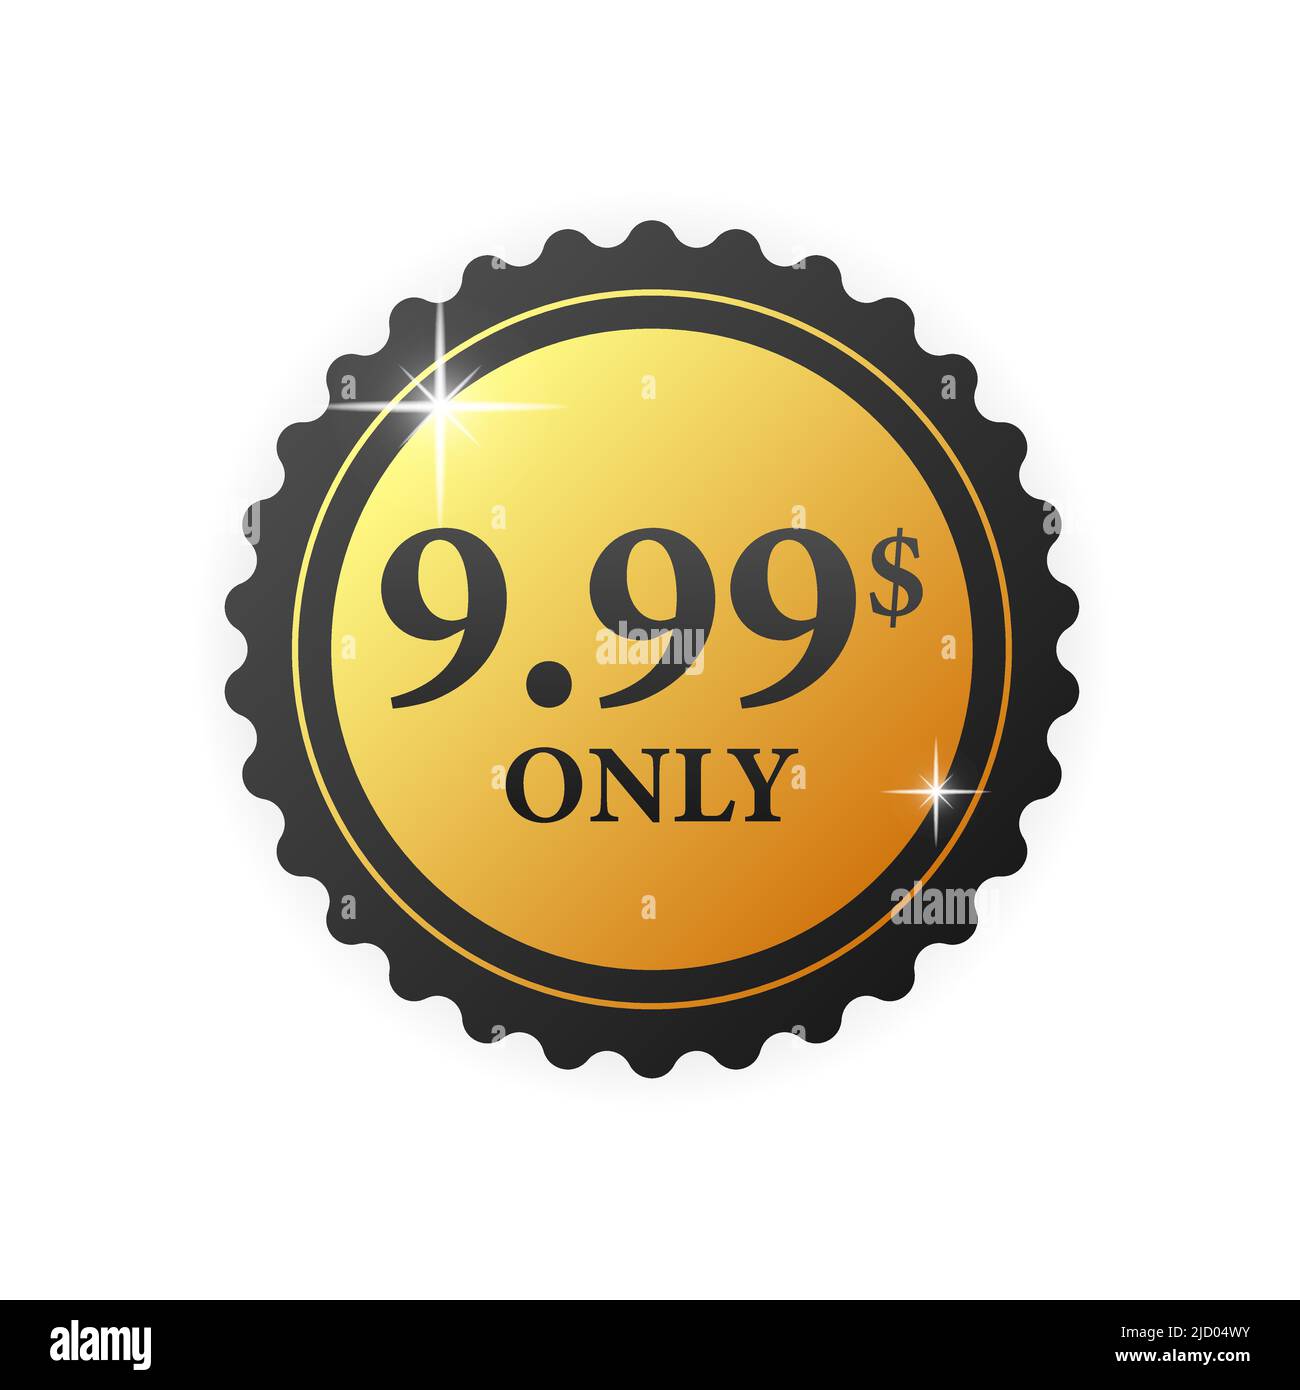 Sale 9.99 Dollars Only Offer Badge Sticker Design in Flat Style. Vector illustration Stock Vector